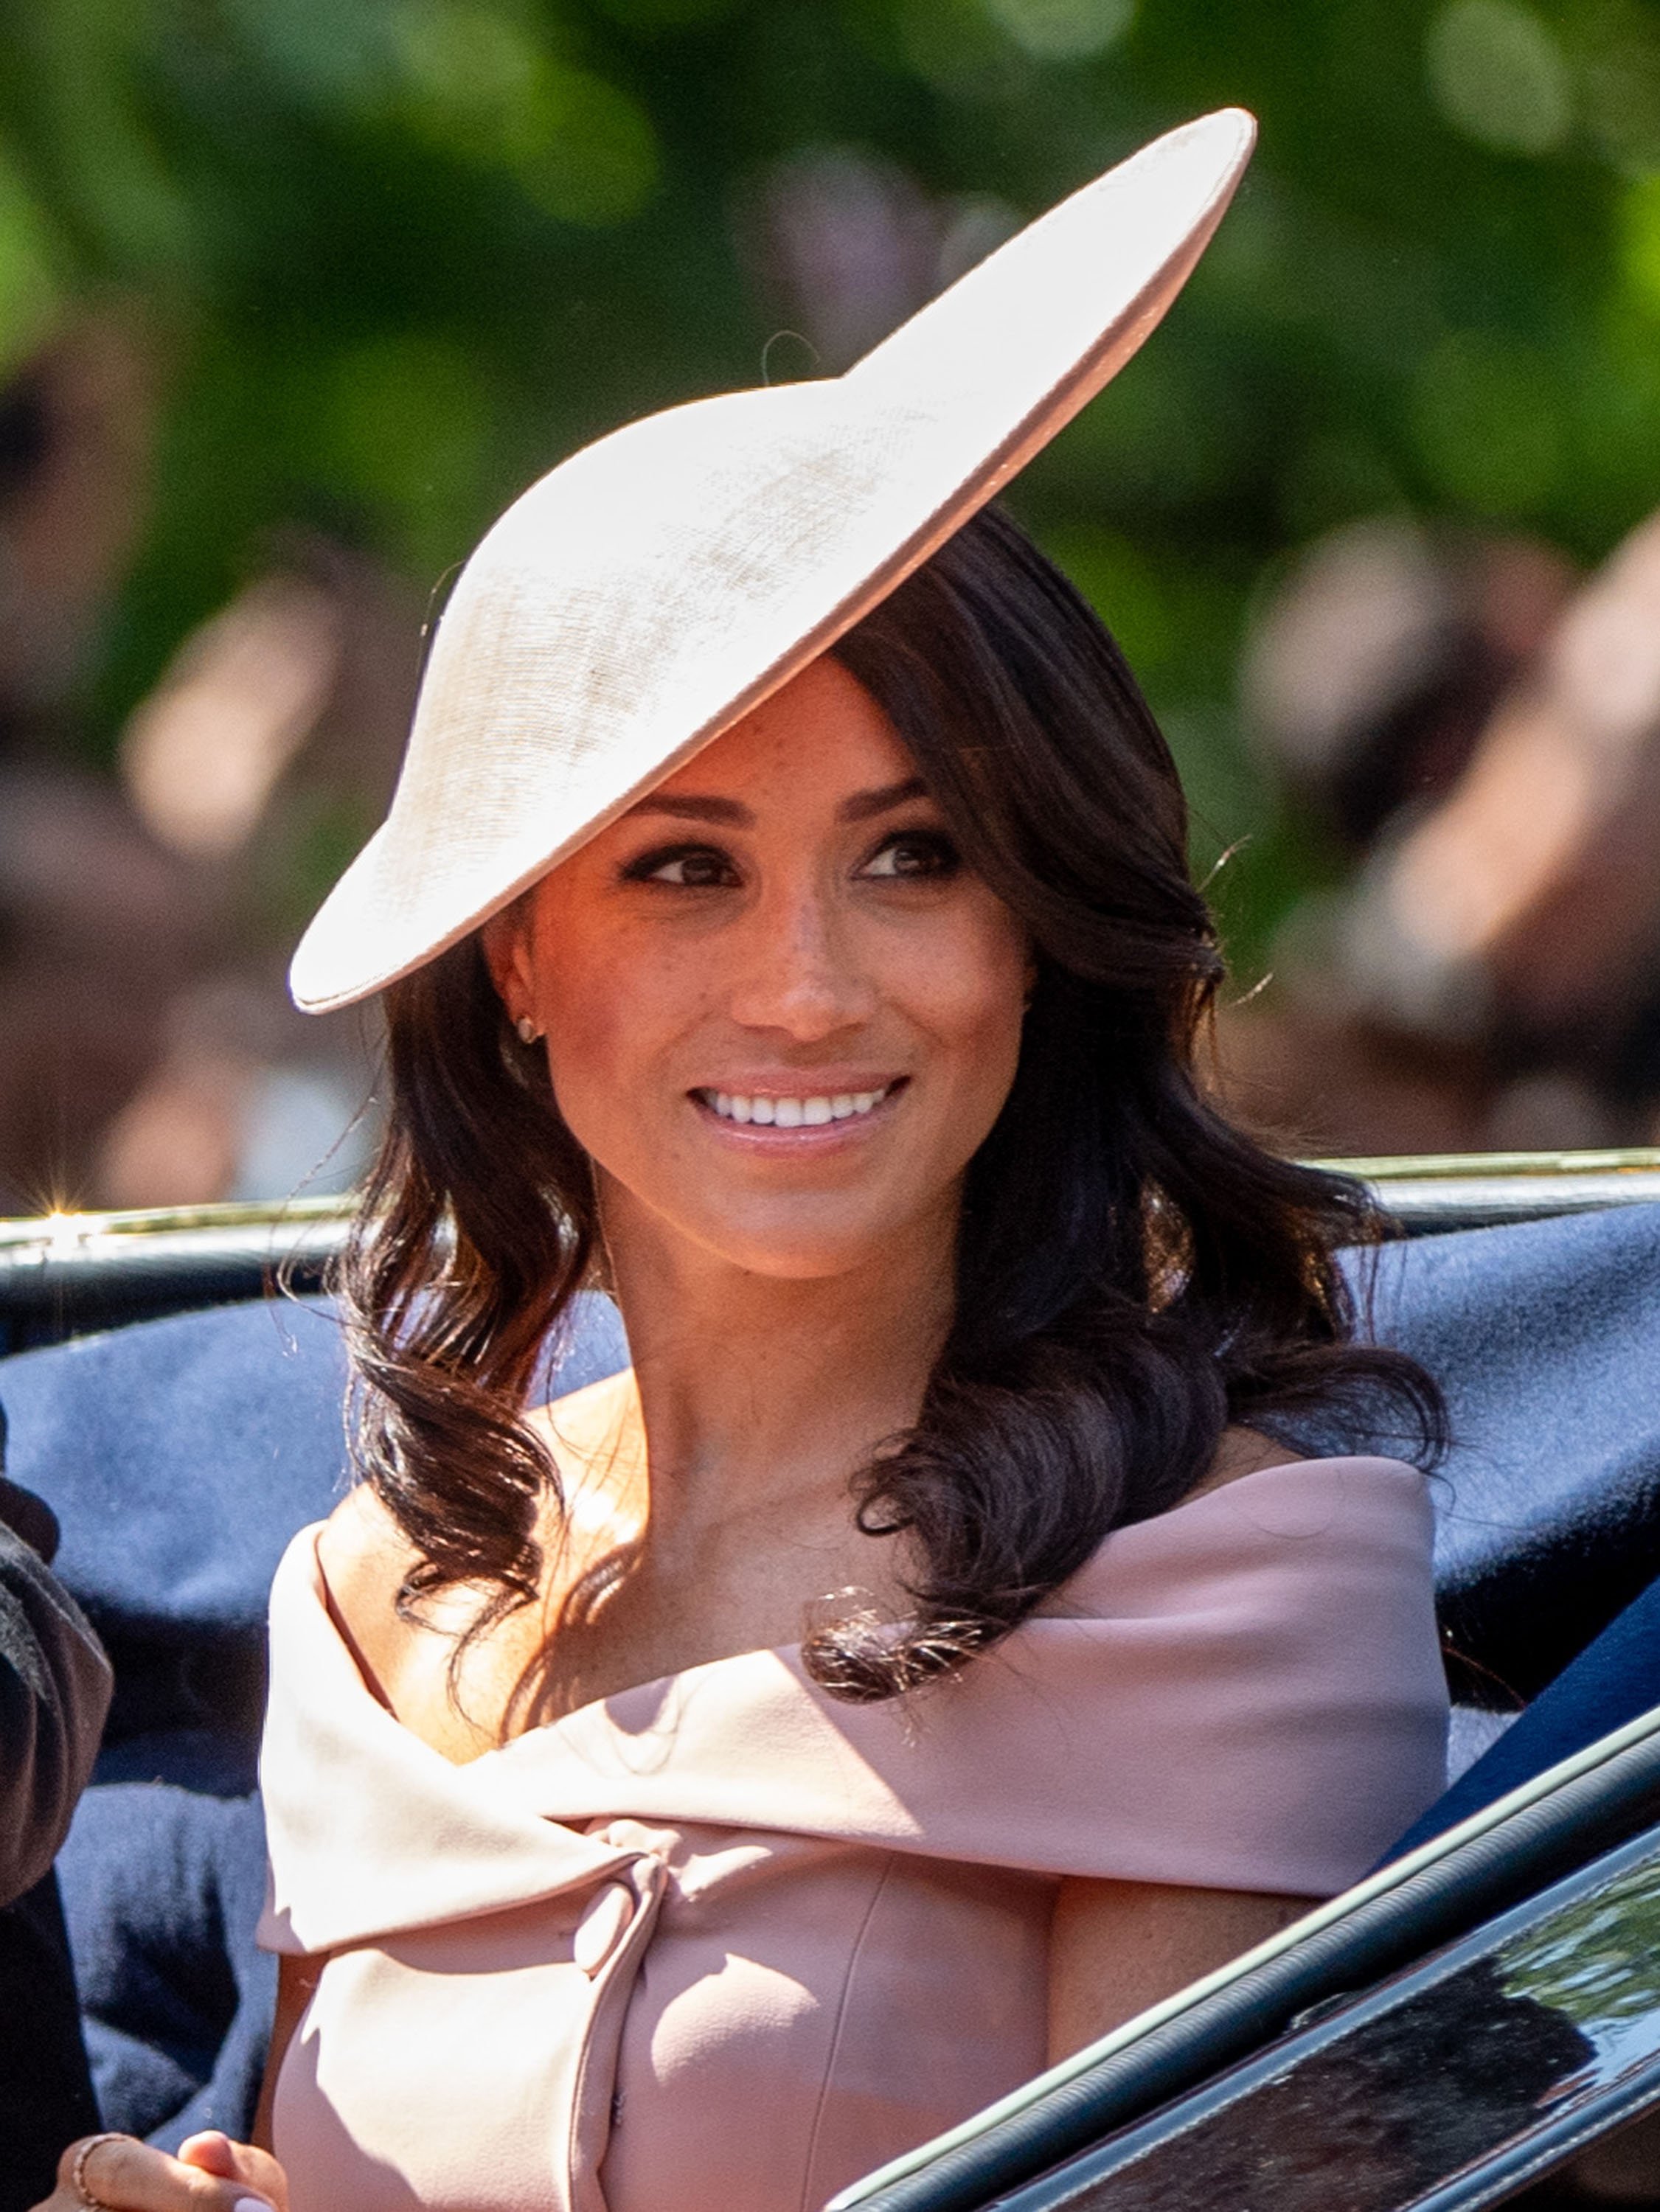 Meghan Markle at the Trooping The Color 2018 | Source: Getty Images